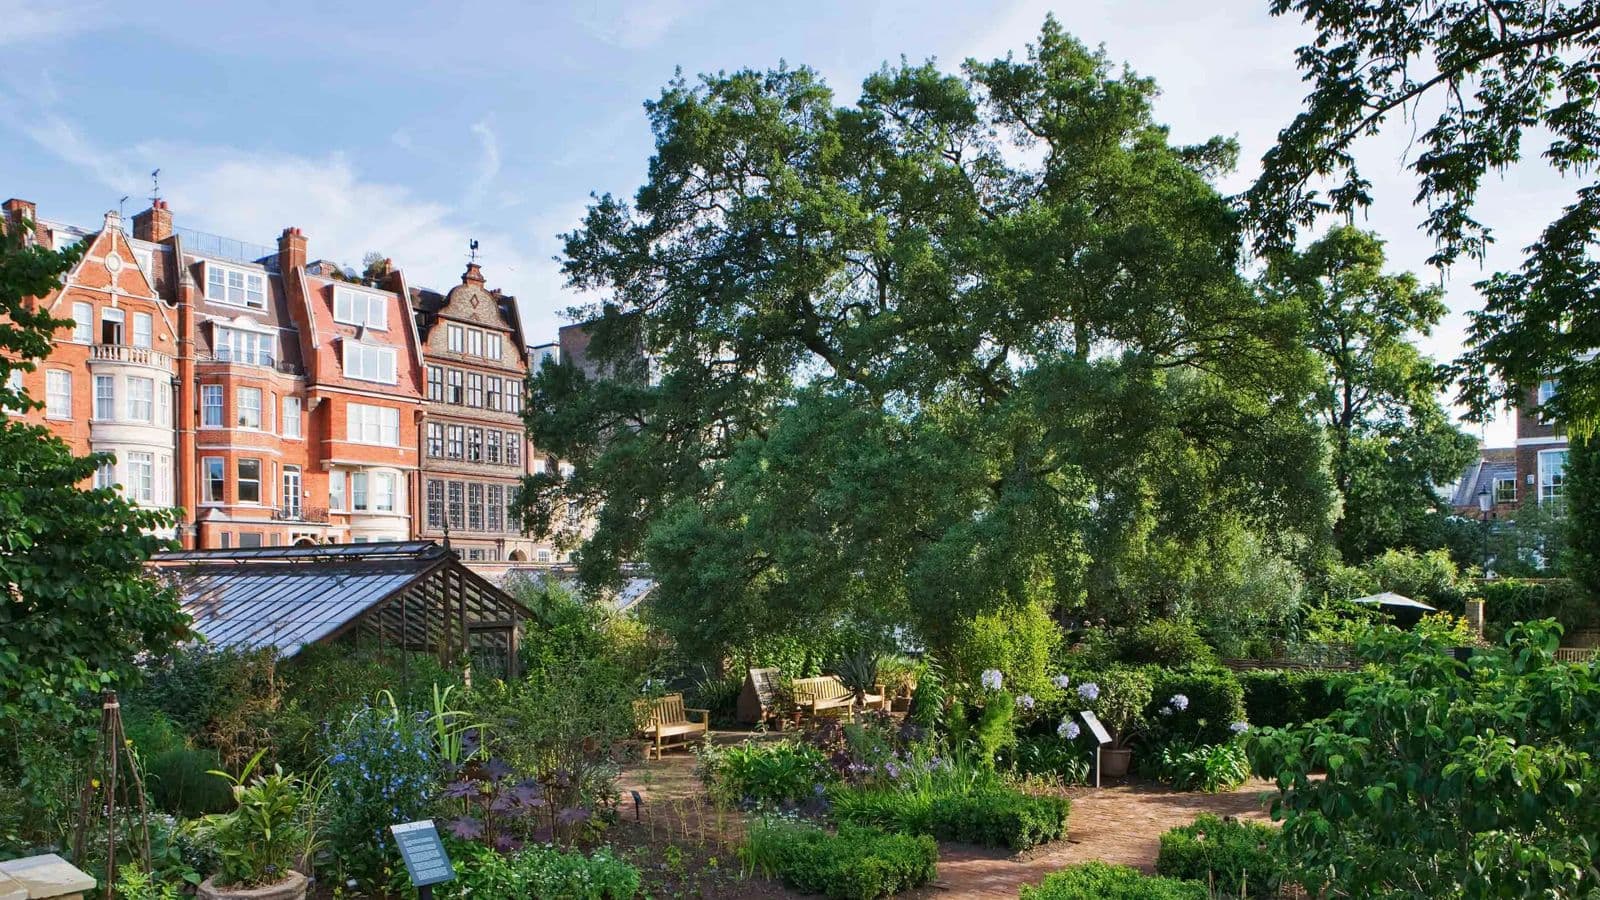 Traveling to London? Add these hidden gardens to your itinerary